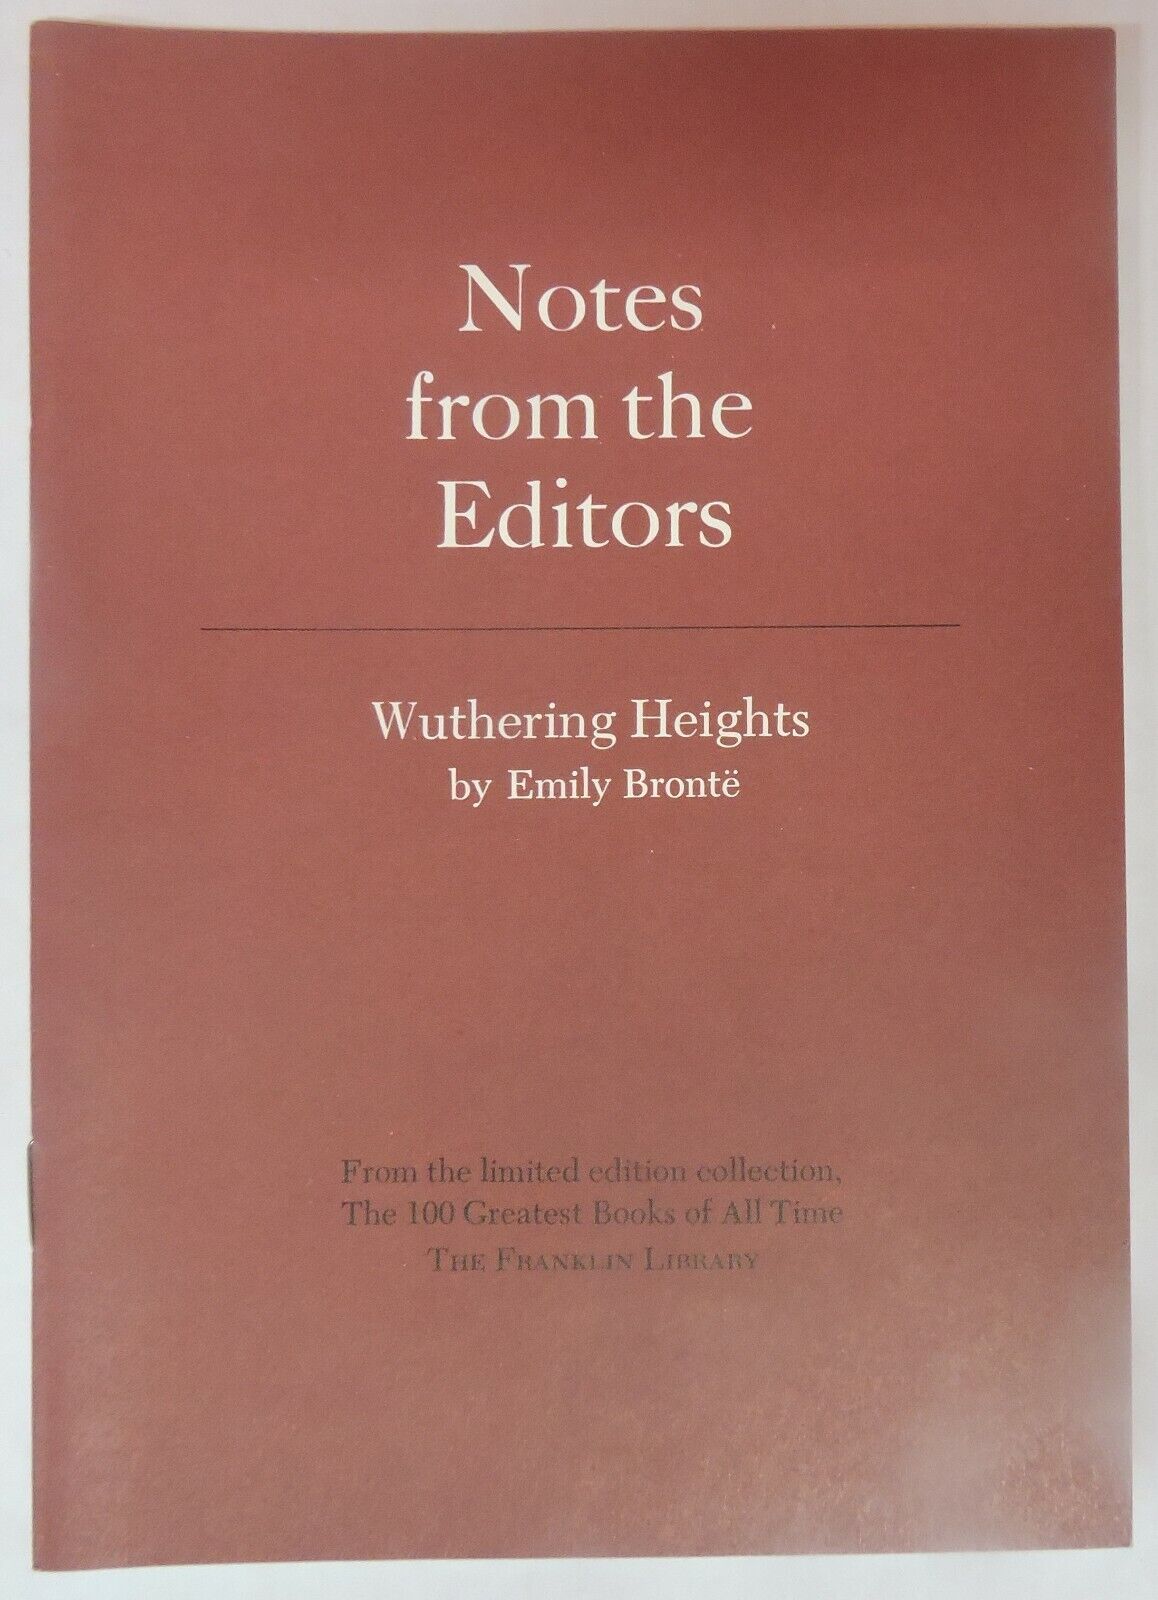 WUTHERING HEIGHTS-EMILY BRONTE-FRANKLIN LIBRARY NOTES FROM EDITORS BOOKLET